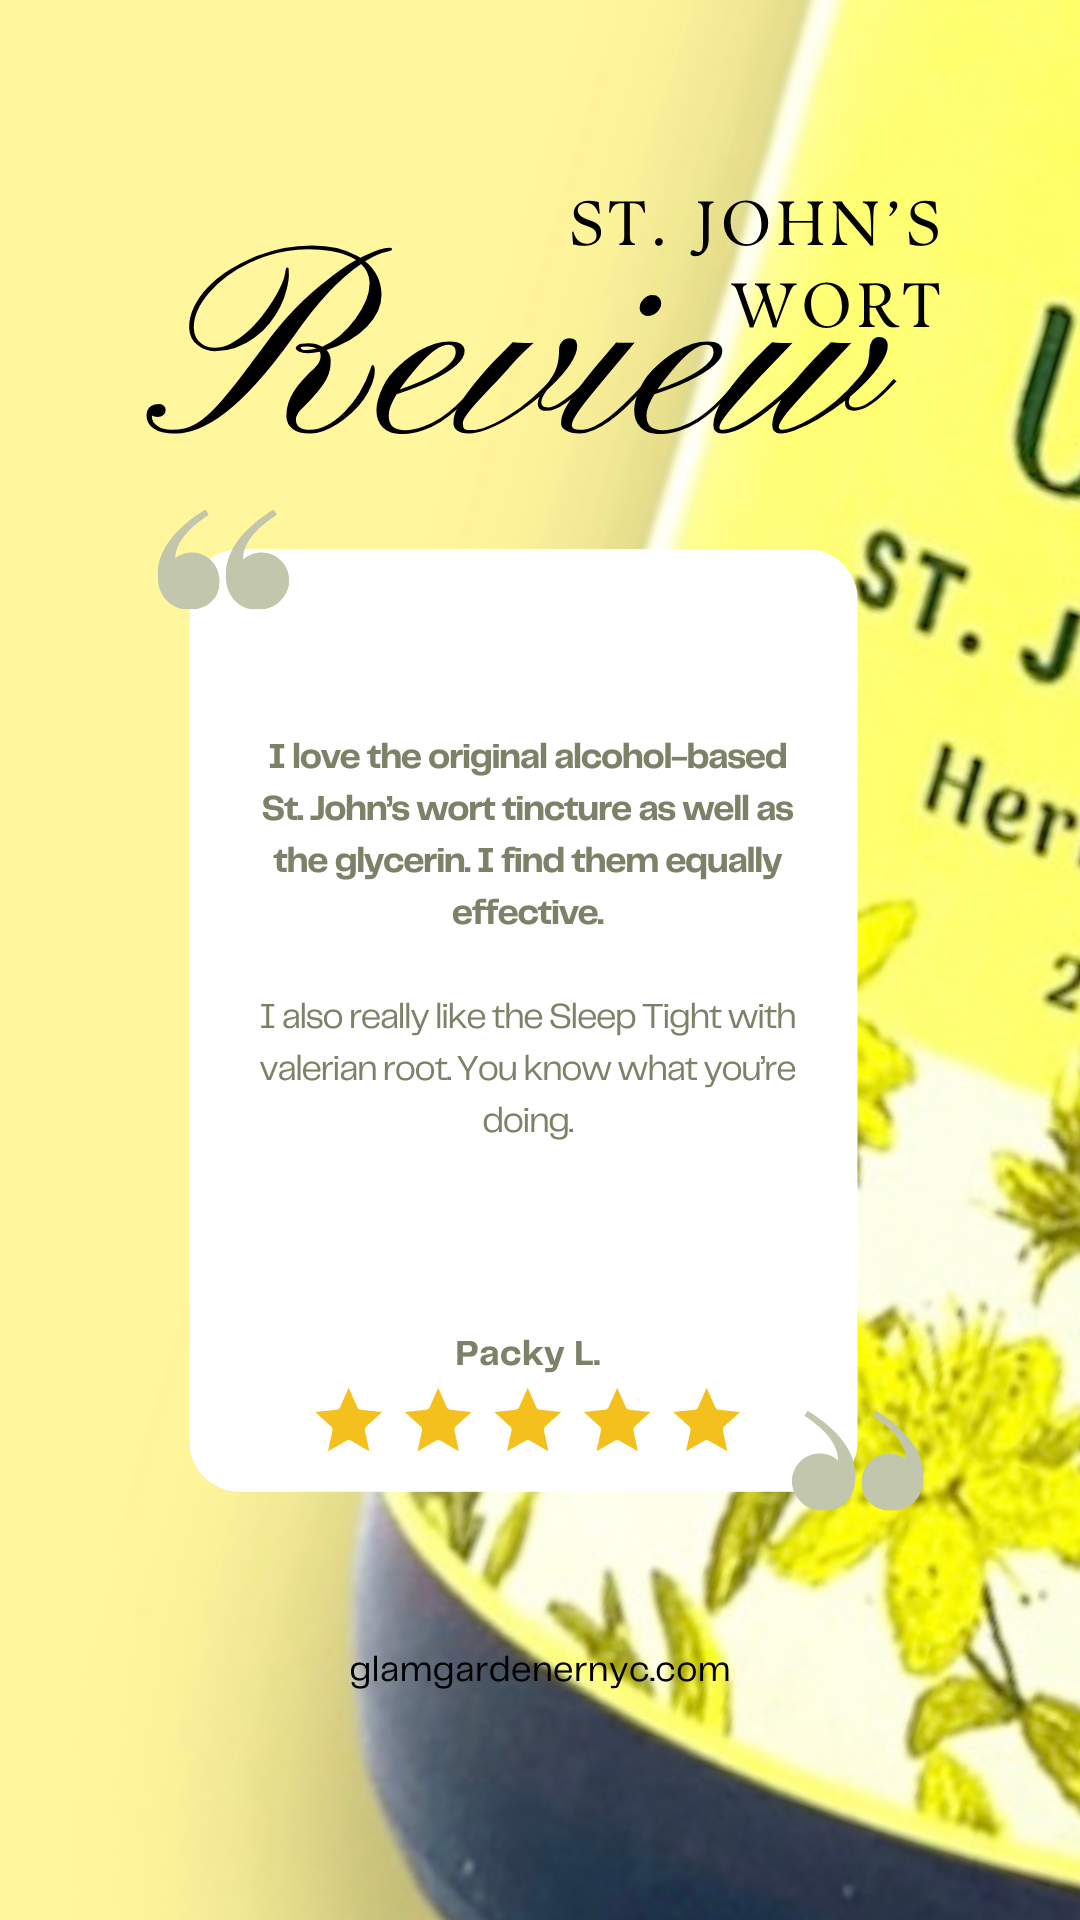 St. John's wort herbal tincture Mood Uplift by Glam Gardener NYC review by Packy L reads: I love the original alcohol-based St. John’s wort tincture as well as the glycerin. I find them equally effective.   I also really like the Sleep Tight with valerian root. You know what you’re doing.